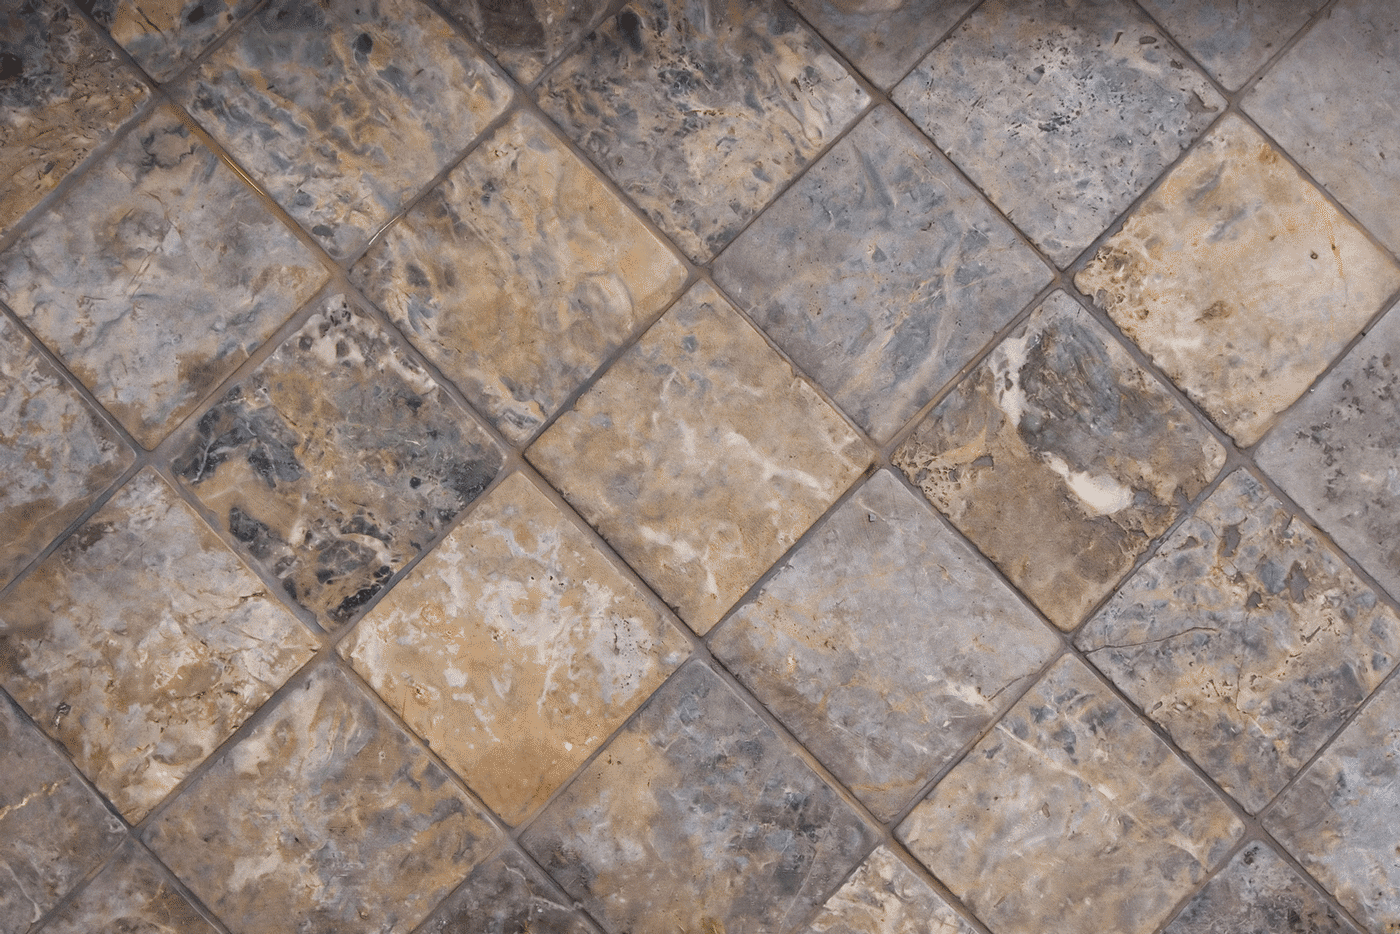 Gold Canyon Tile Floor Removal. How To Keep Floors Clean